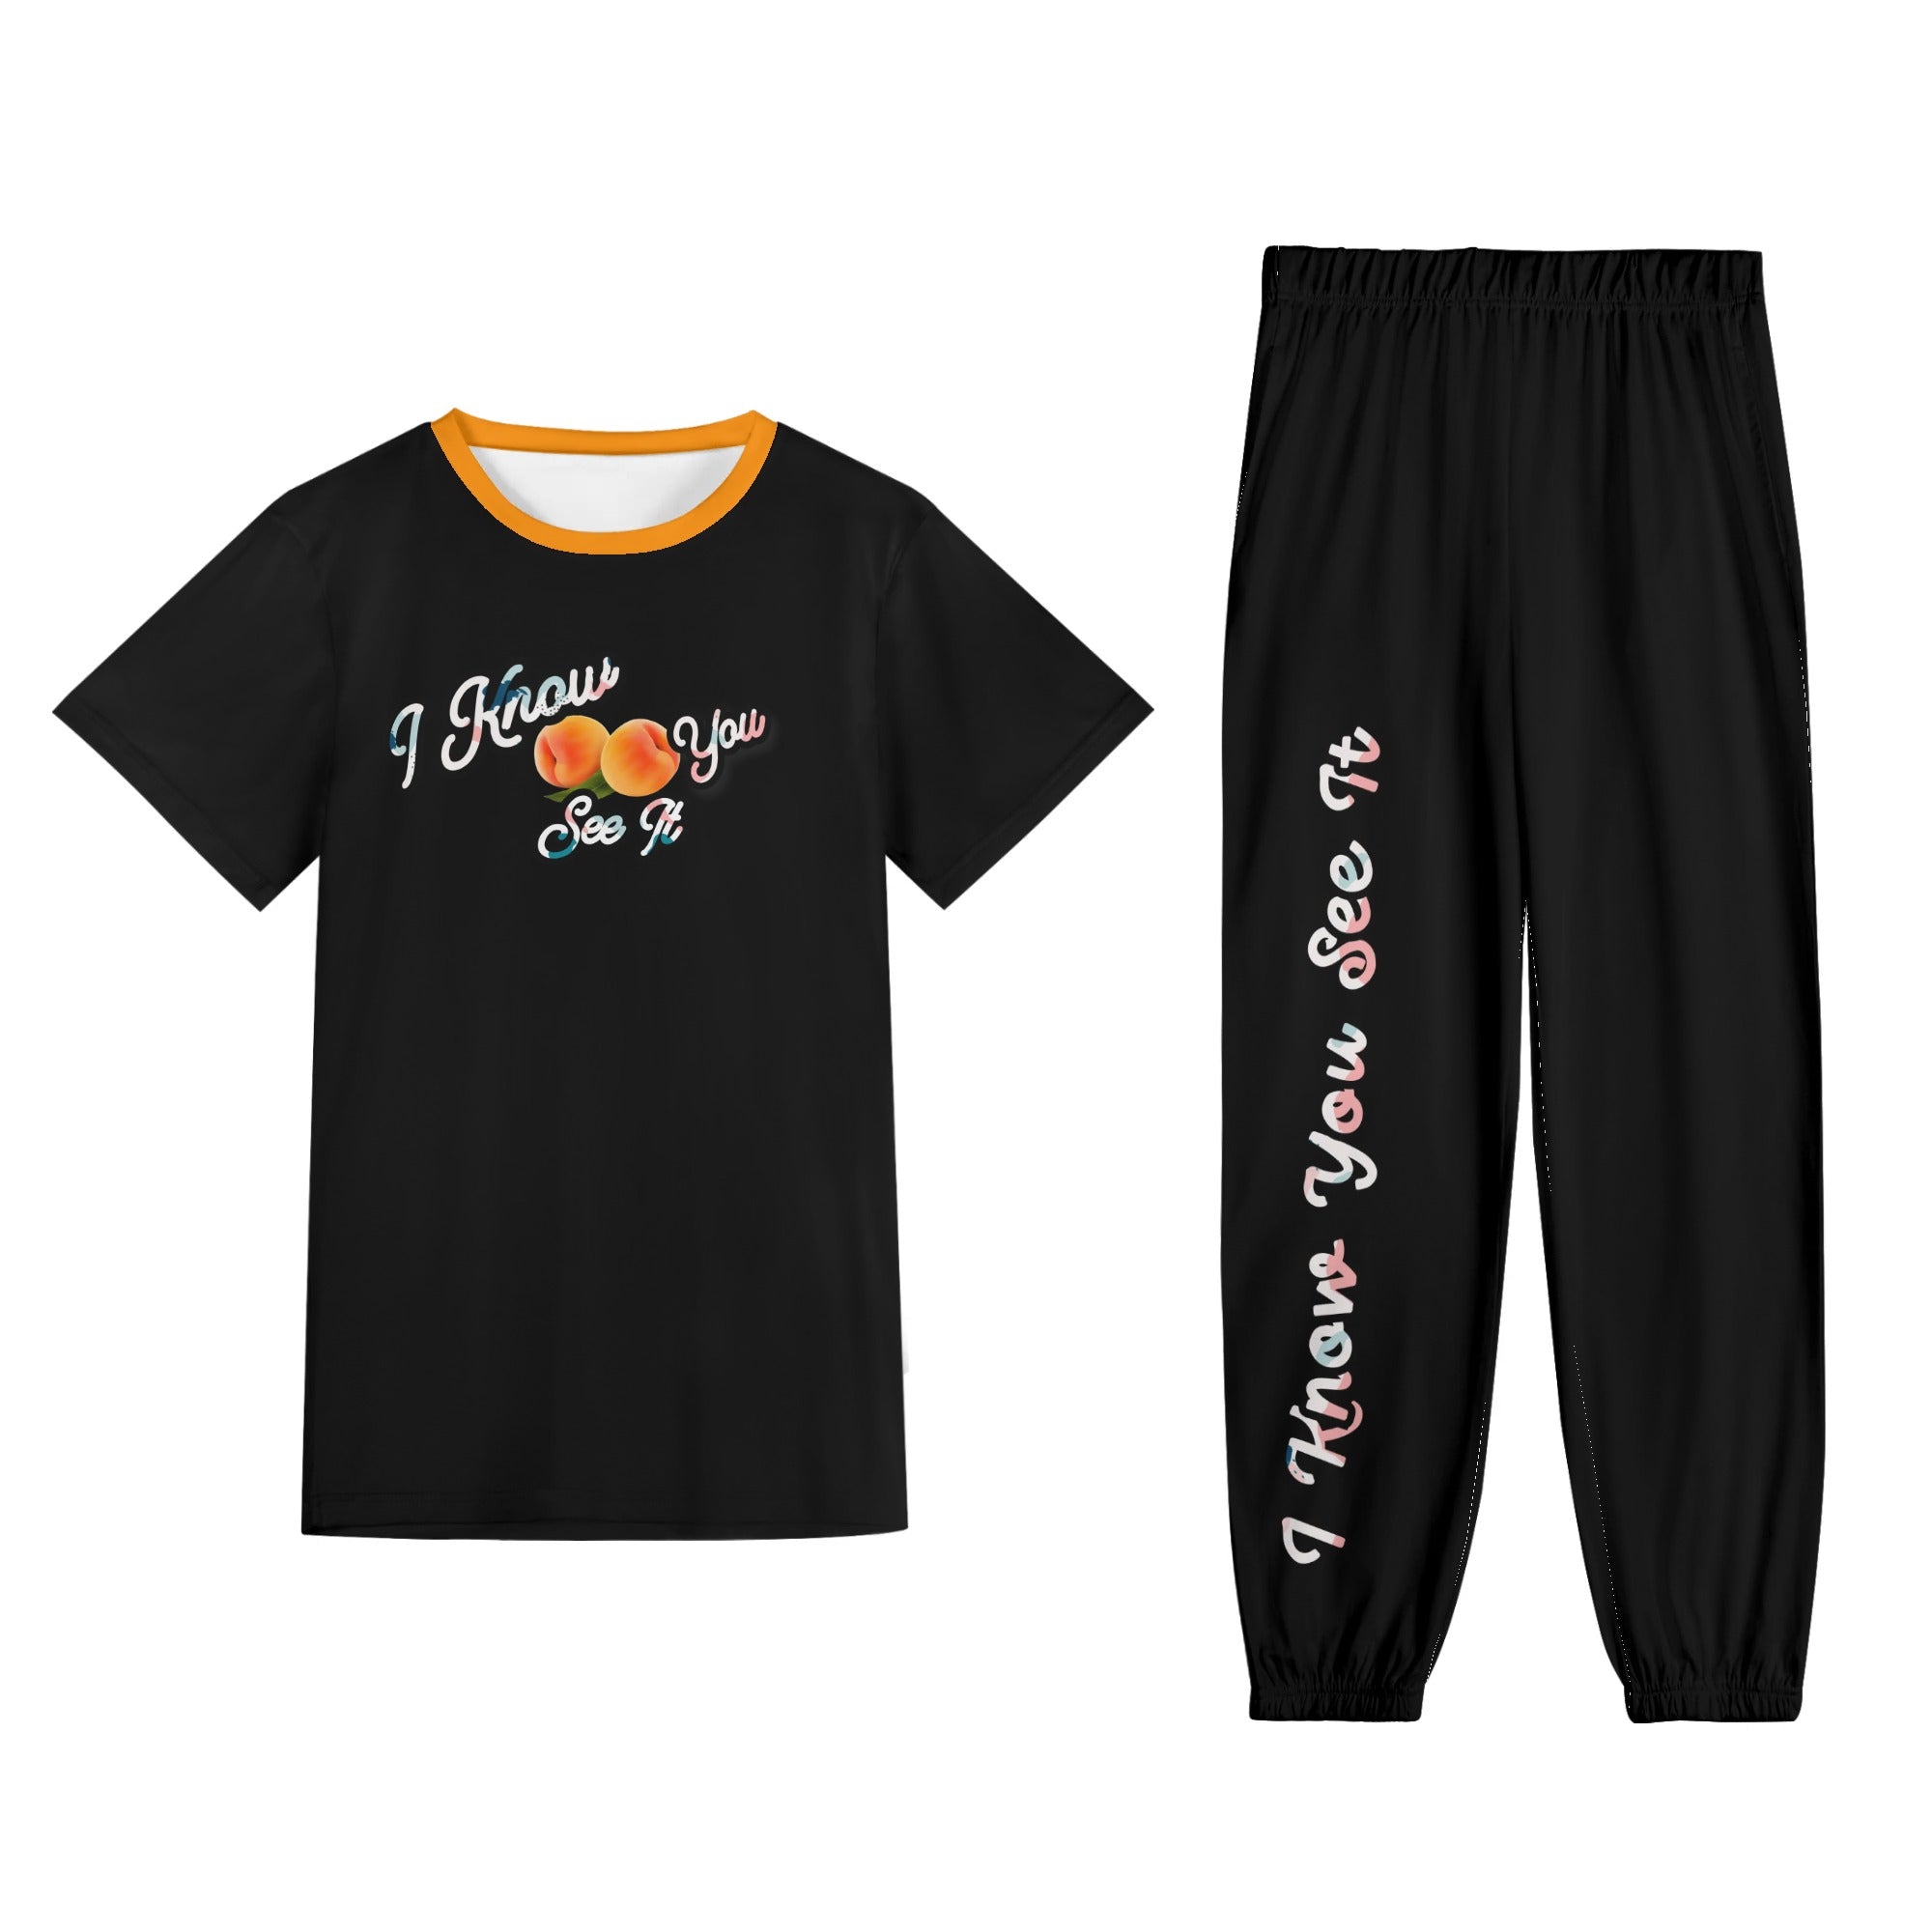 Black - I Know You See It- Womens Short Sleeve Sports Outfit Set 2 - Womens Pants Sets at TFC&H Co.